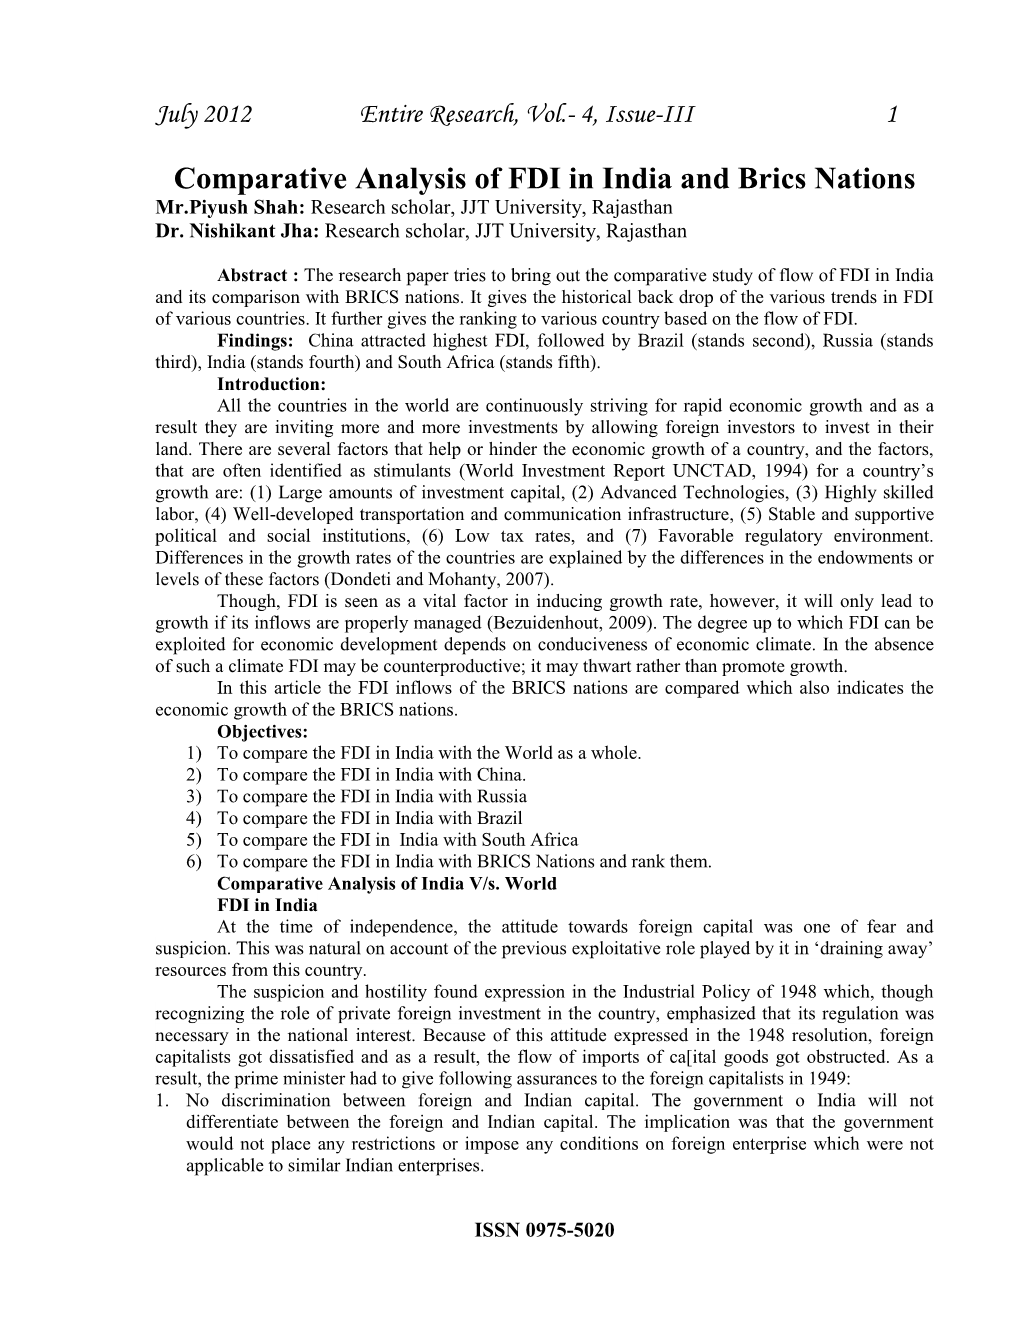 Comparative Analysis of FDI in India and Brics Nations Mr.Piyush Shah: Research Scholar, JJT University, Rajasthan Dr